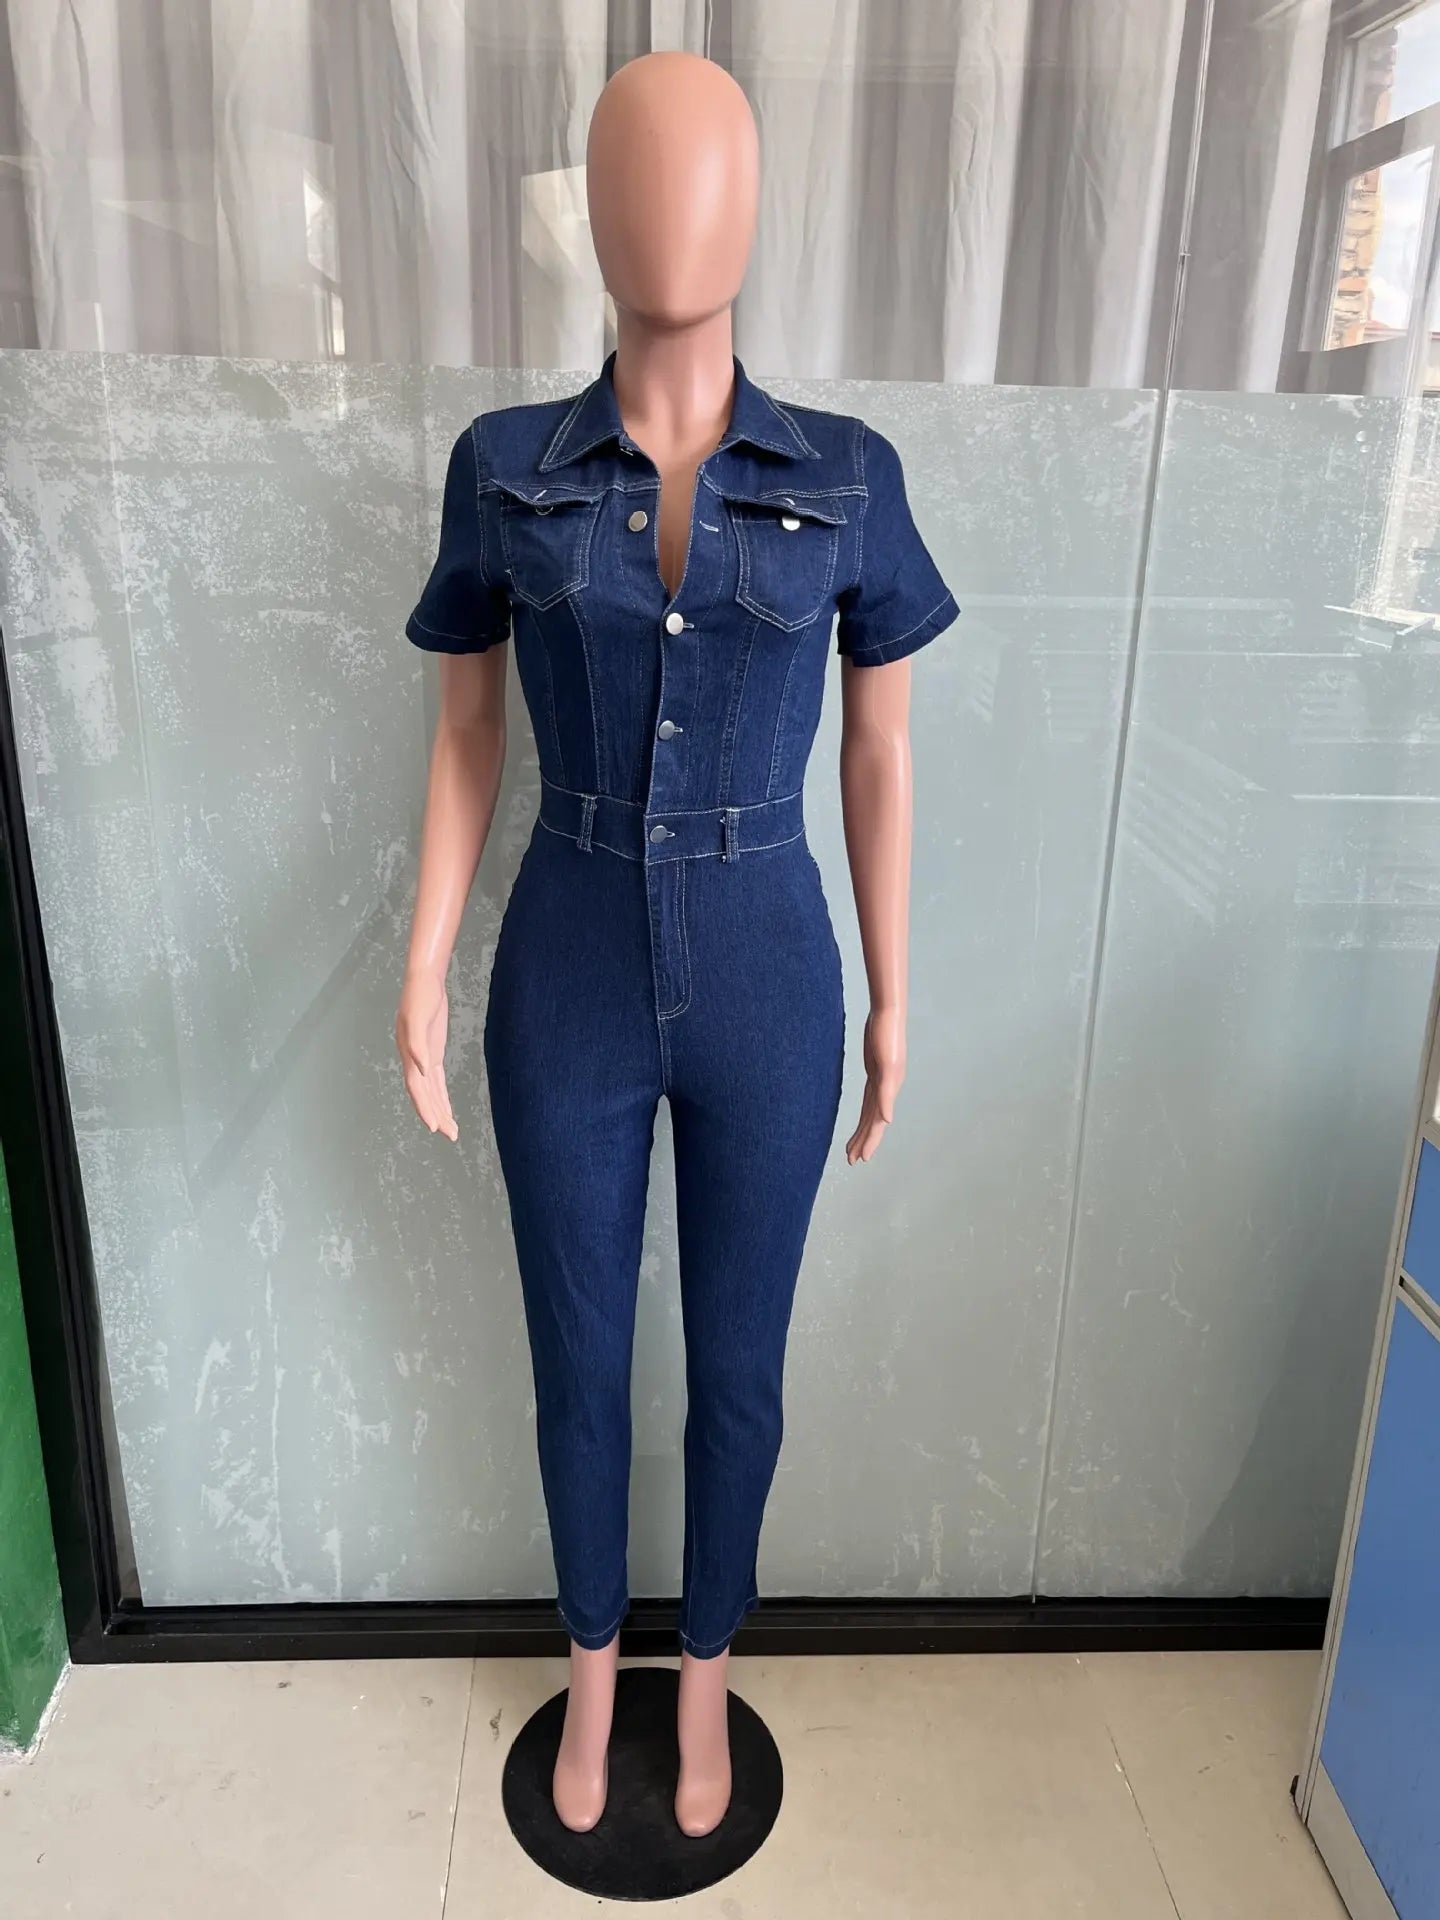 Women's Fashion Denim Jumpsuit Ladies Winter Solid Color Short Sleeved Lapel Single-Breasted Jeans Jumpsuit For Women